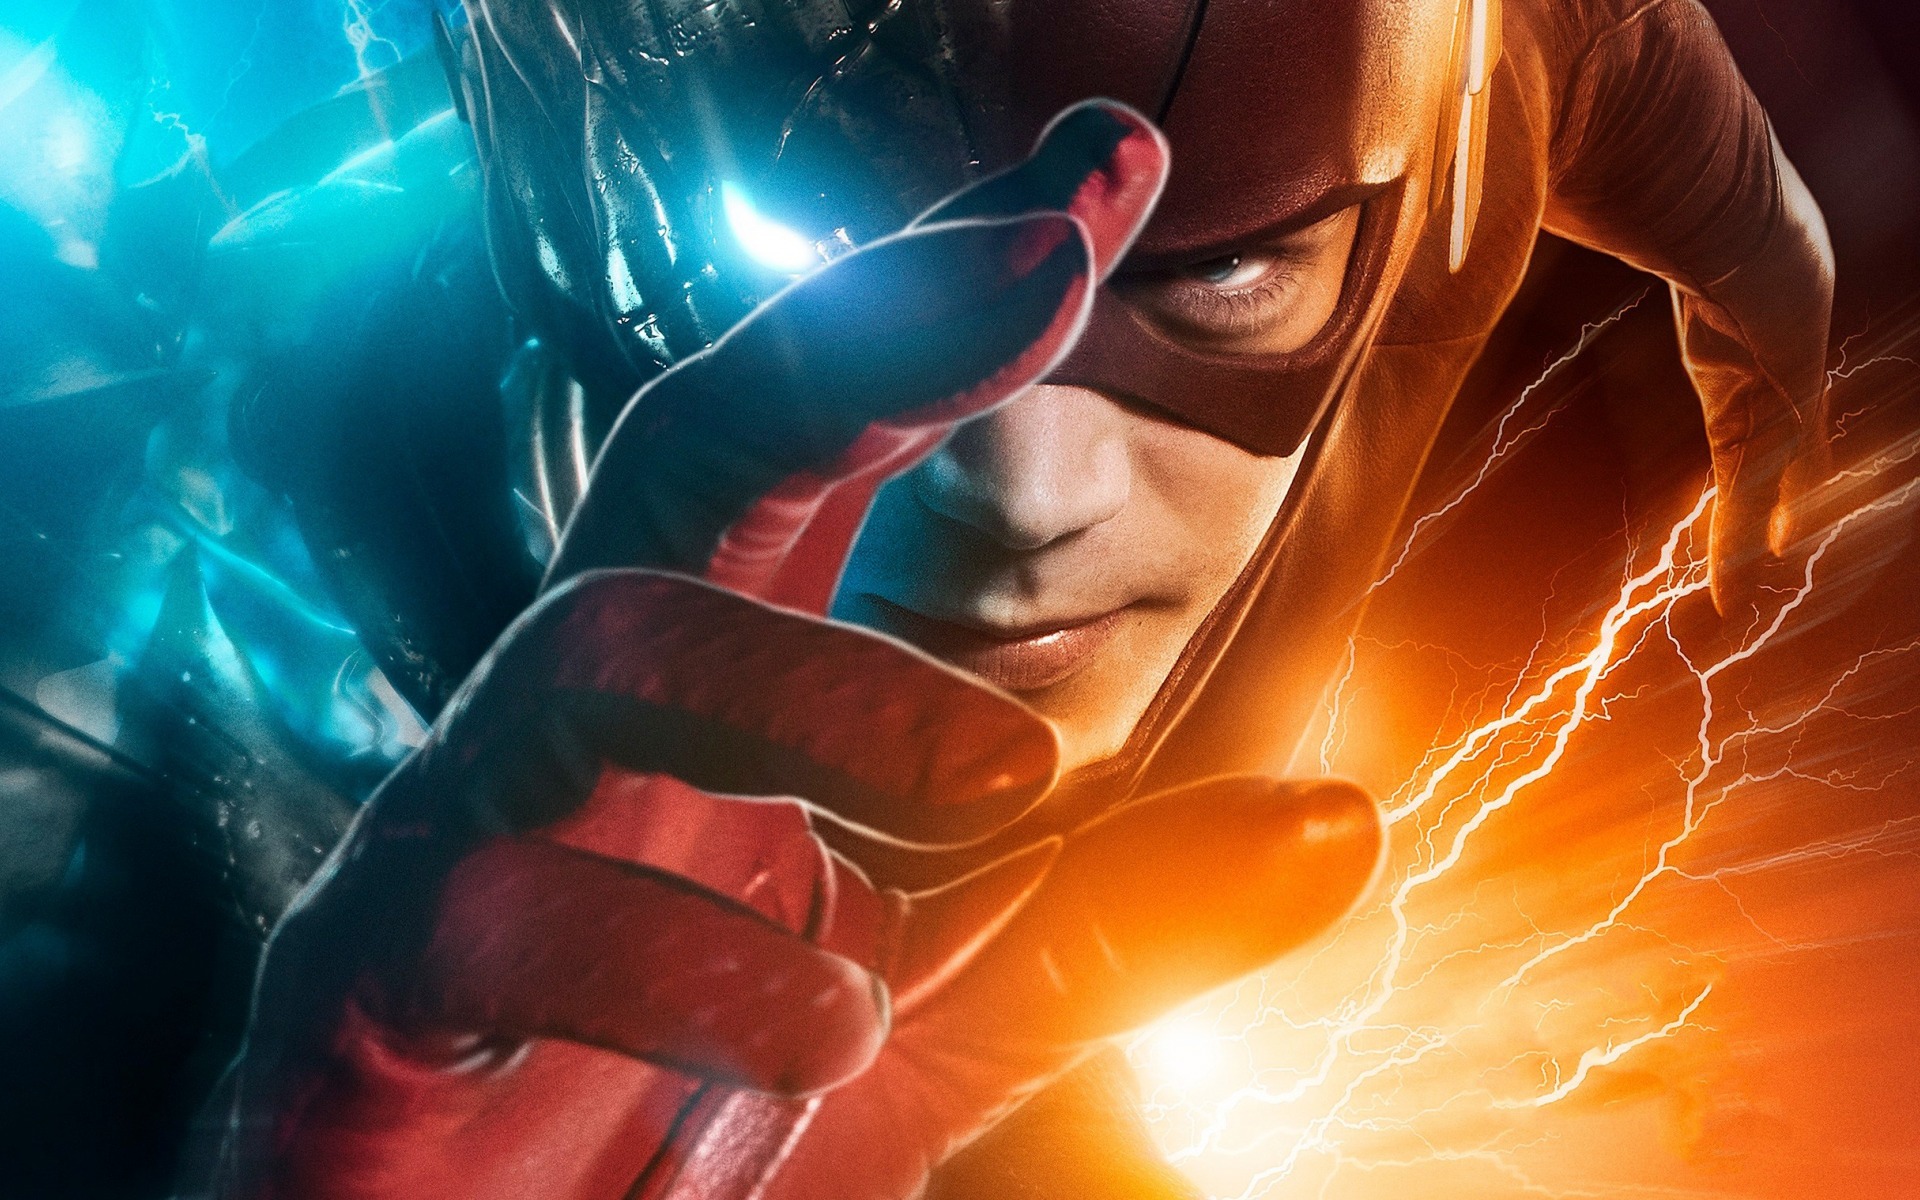 Download wallpaper The Flash, tv series, Thomas Grant Gustin, Superheroes, movie characters for desktop with resolution 1920x1200. High Quality HD picture wallpaper